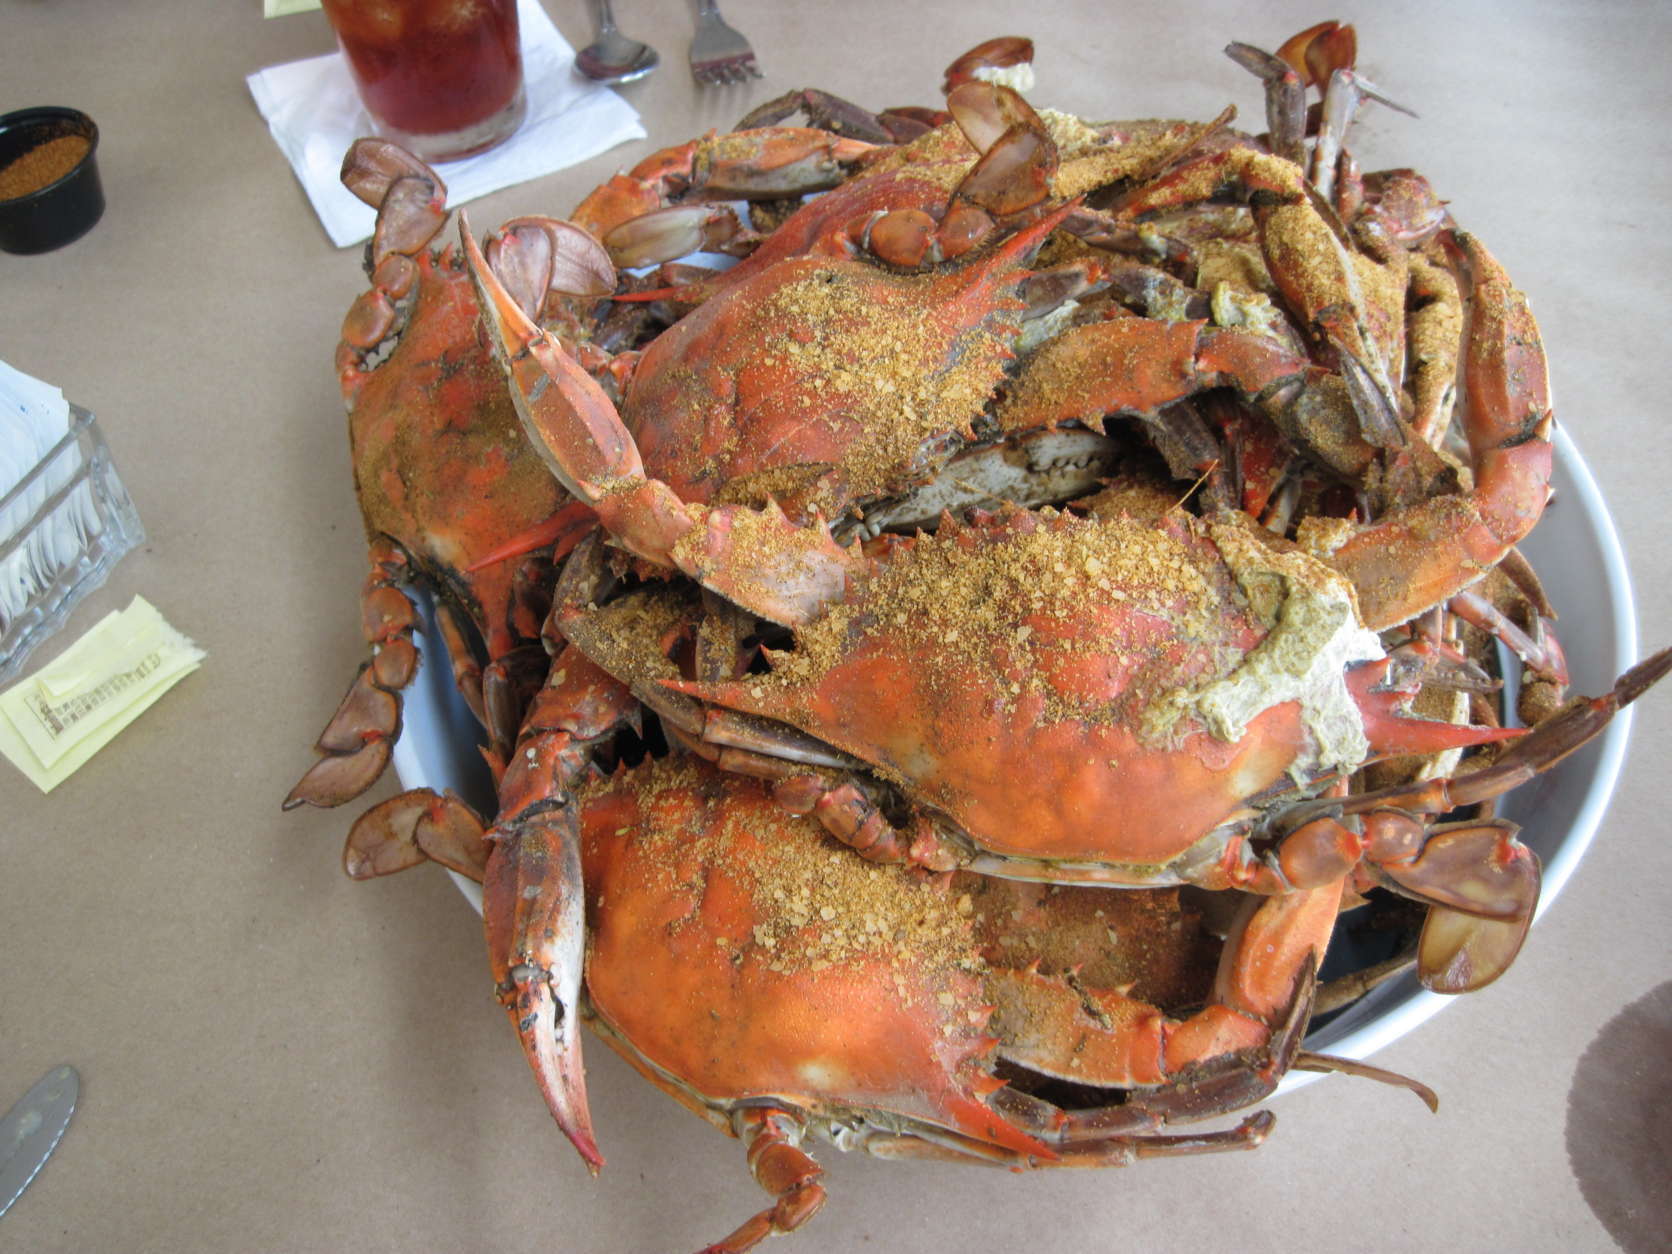 Steamed crabs at Suicide Bridge Restaurant are piping hot. (WTOP/Colleen Kelleher)